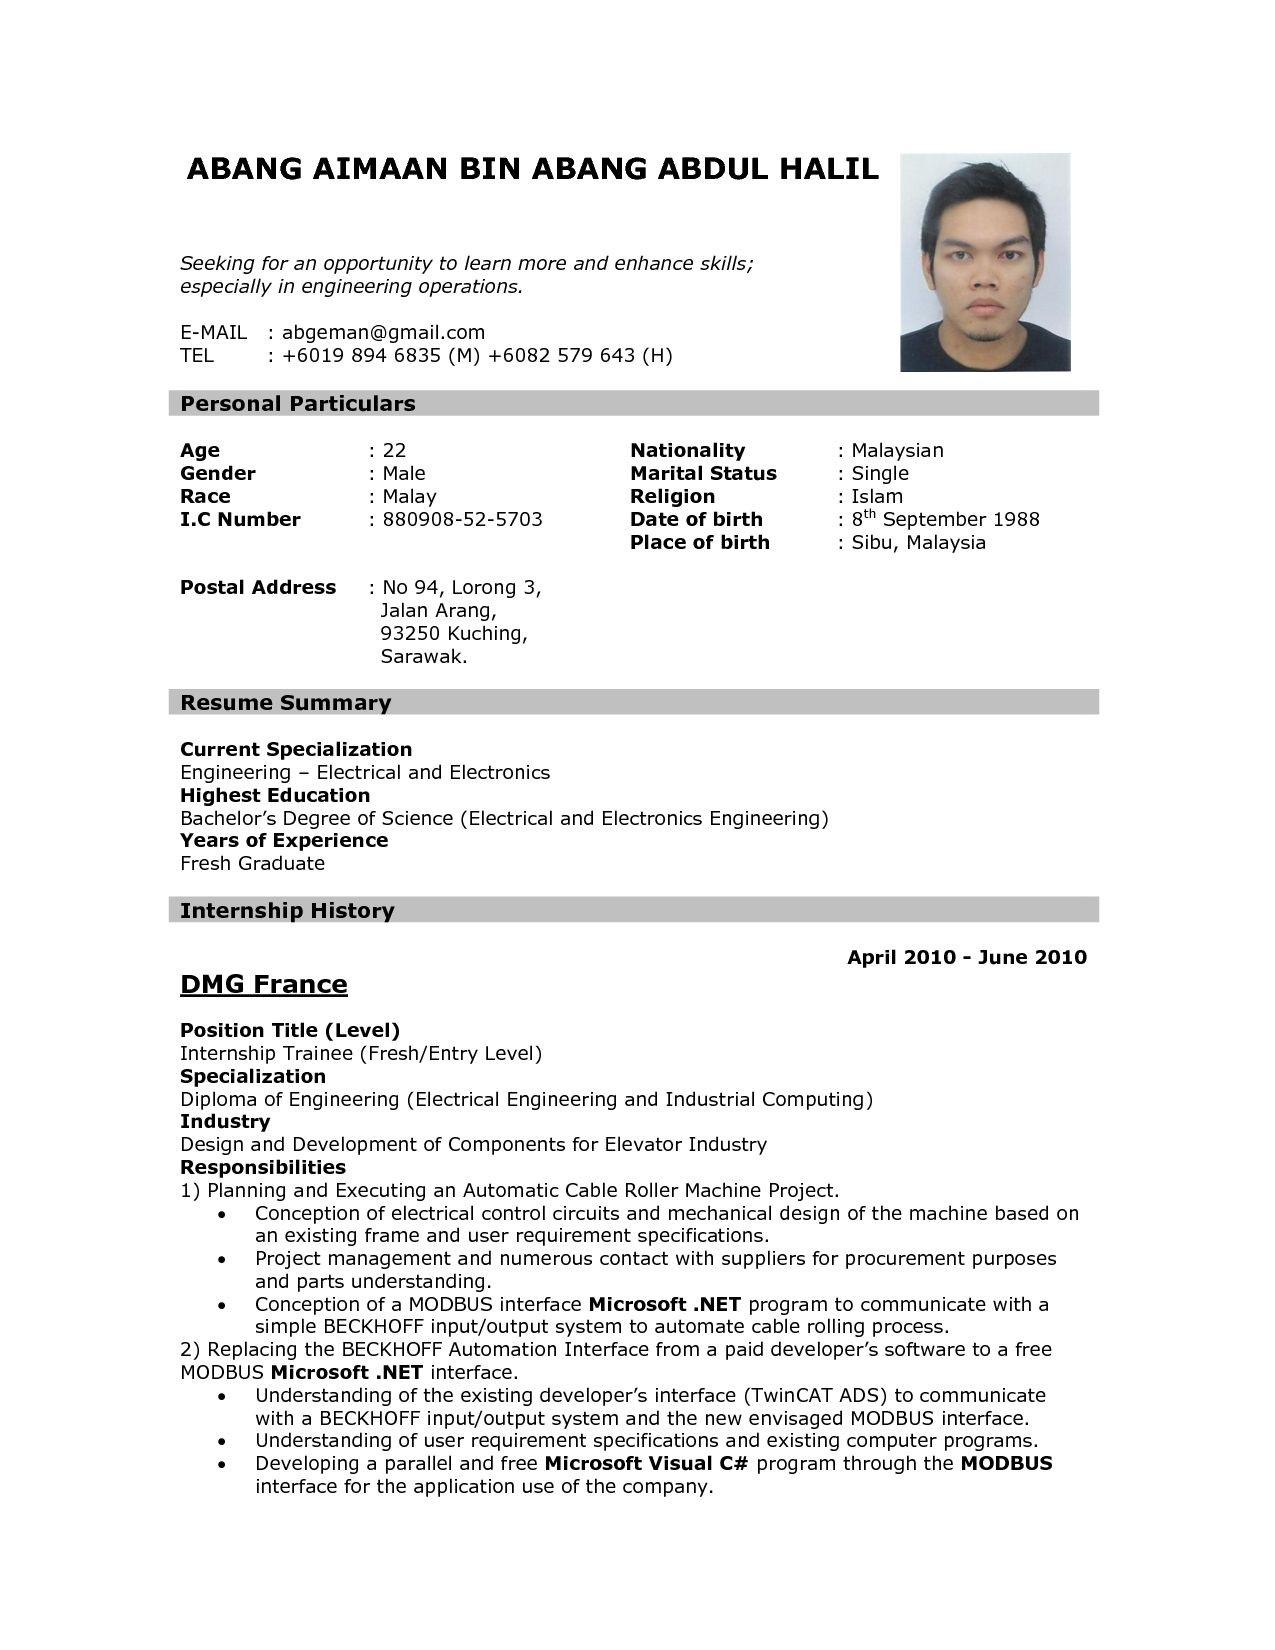 Sample Resume with Position Applied for Resume Templates App #resume #resumetemplates #templates Job …